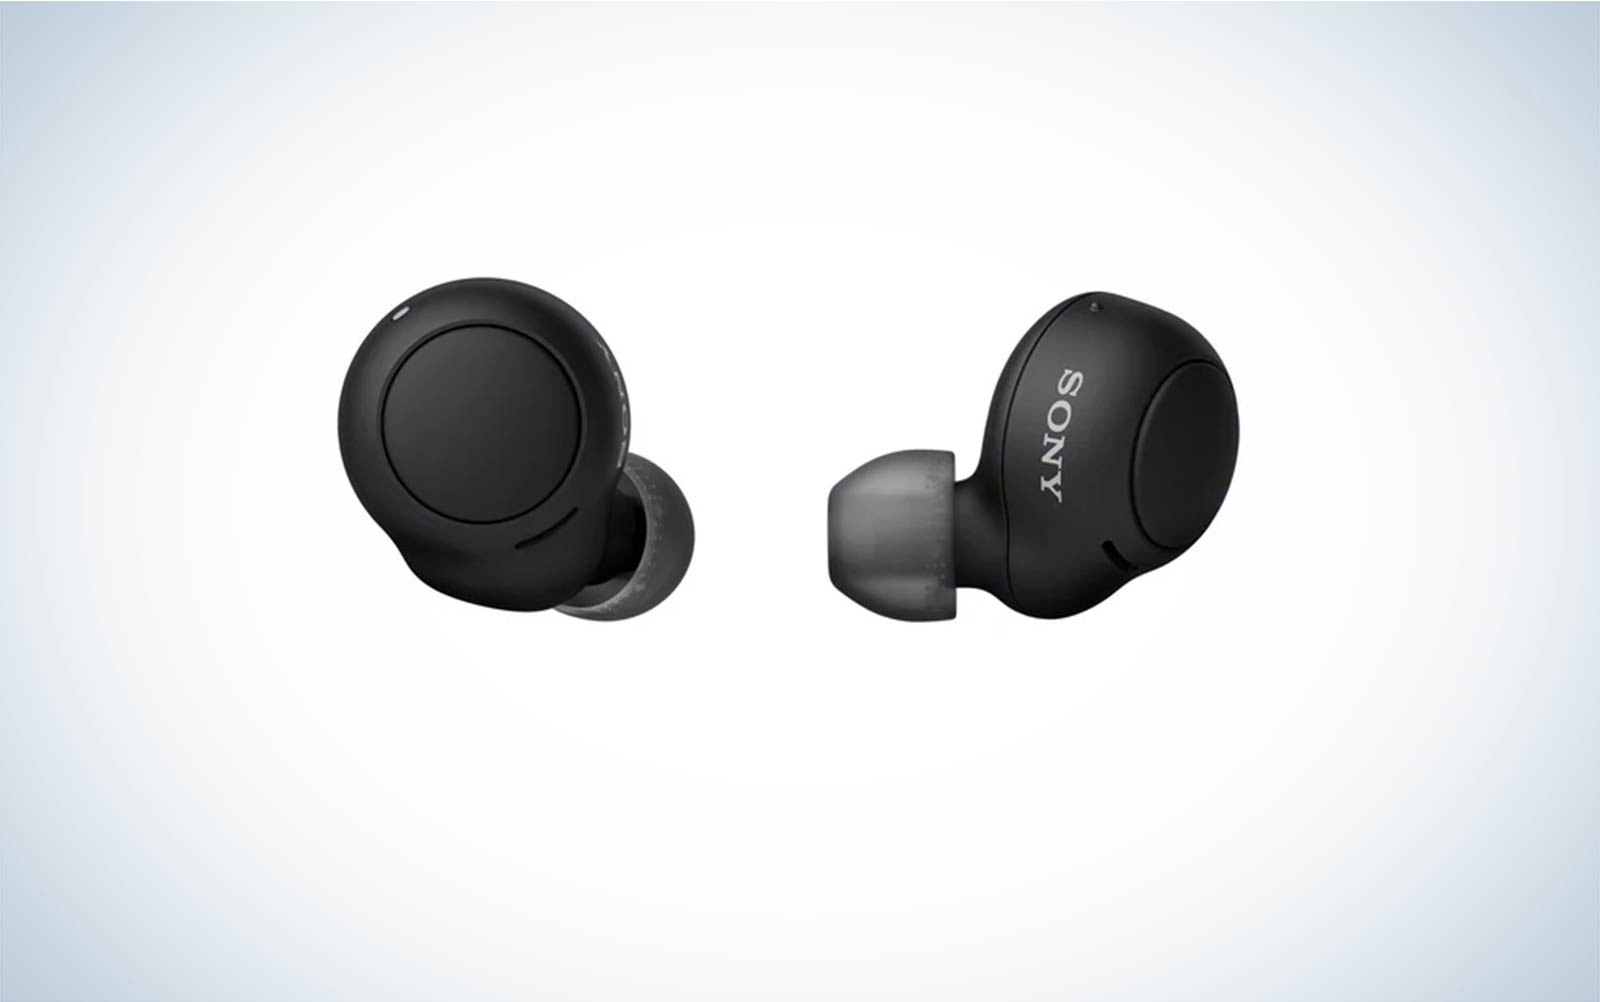 Sony wireless earbuds on-sale at walmart for Black Friday on a plain background